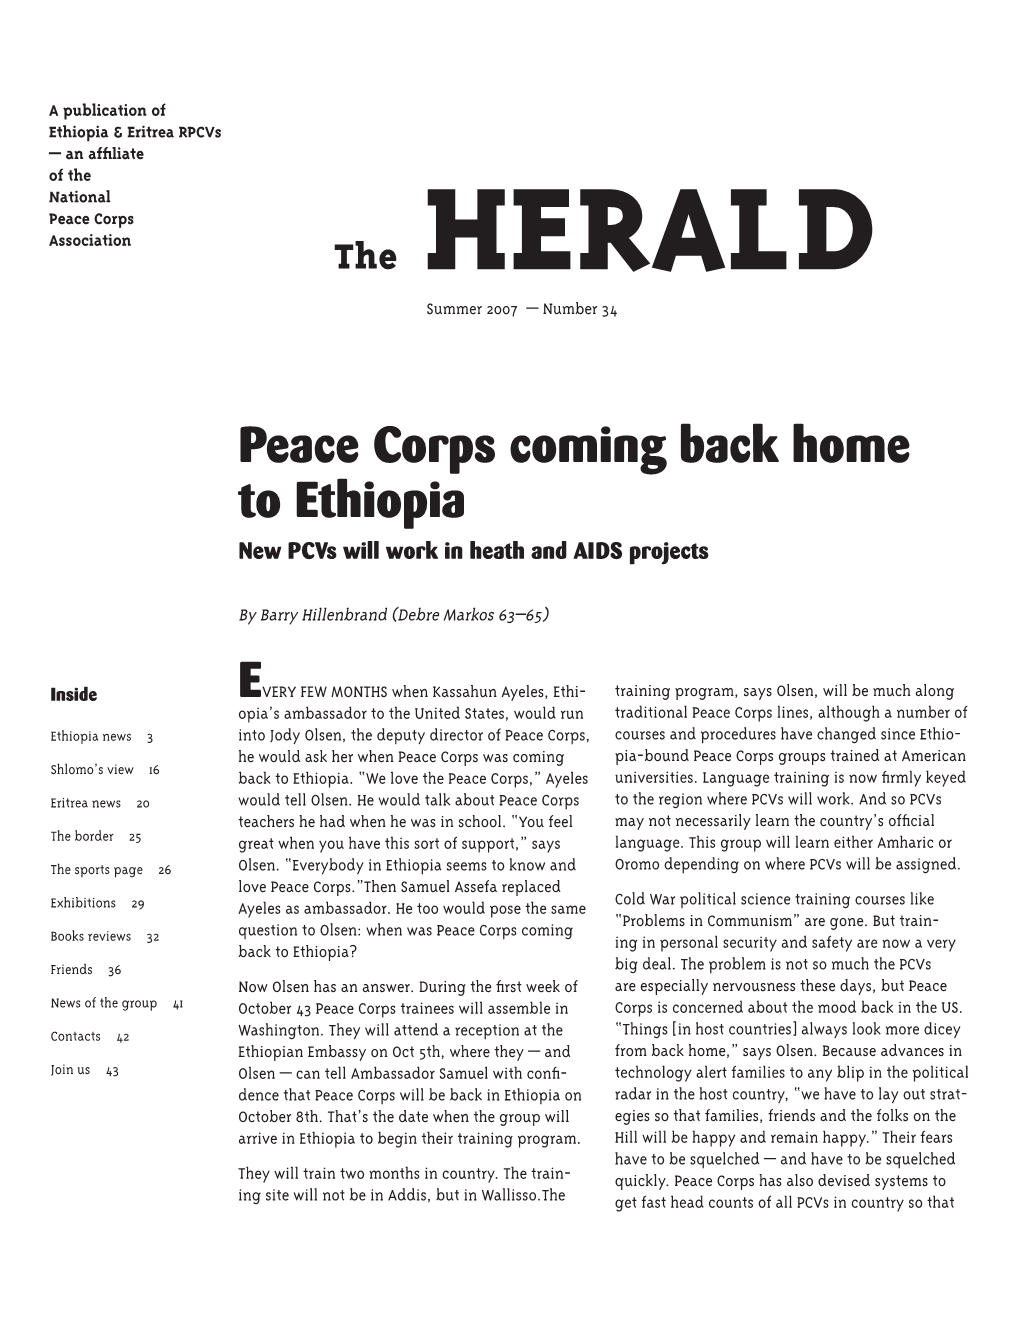 Ethiopia & Eritrea Rpcvs — an Affiliate  of the National  Peace Corps  Association the HERALD Summer 2007 — Number 34